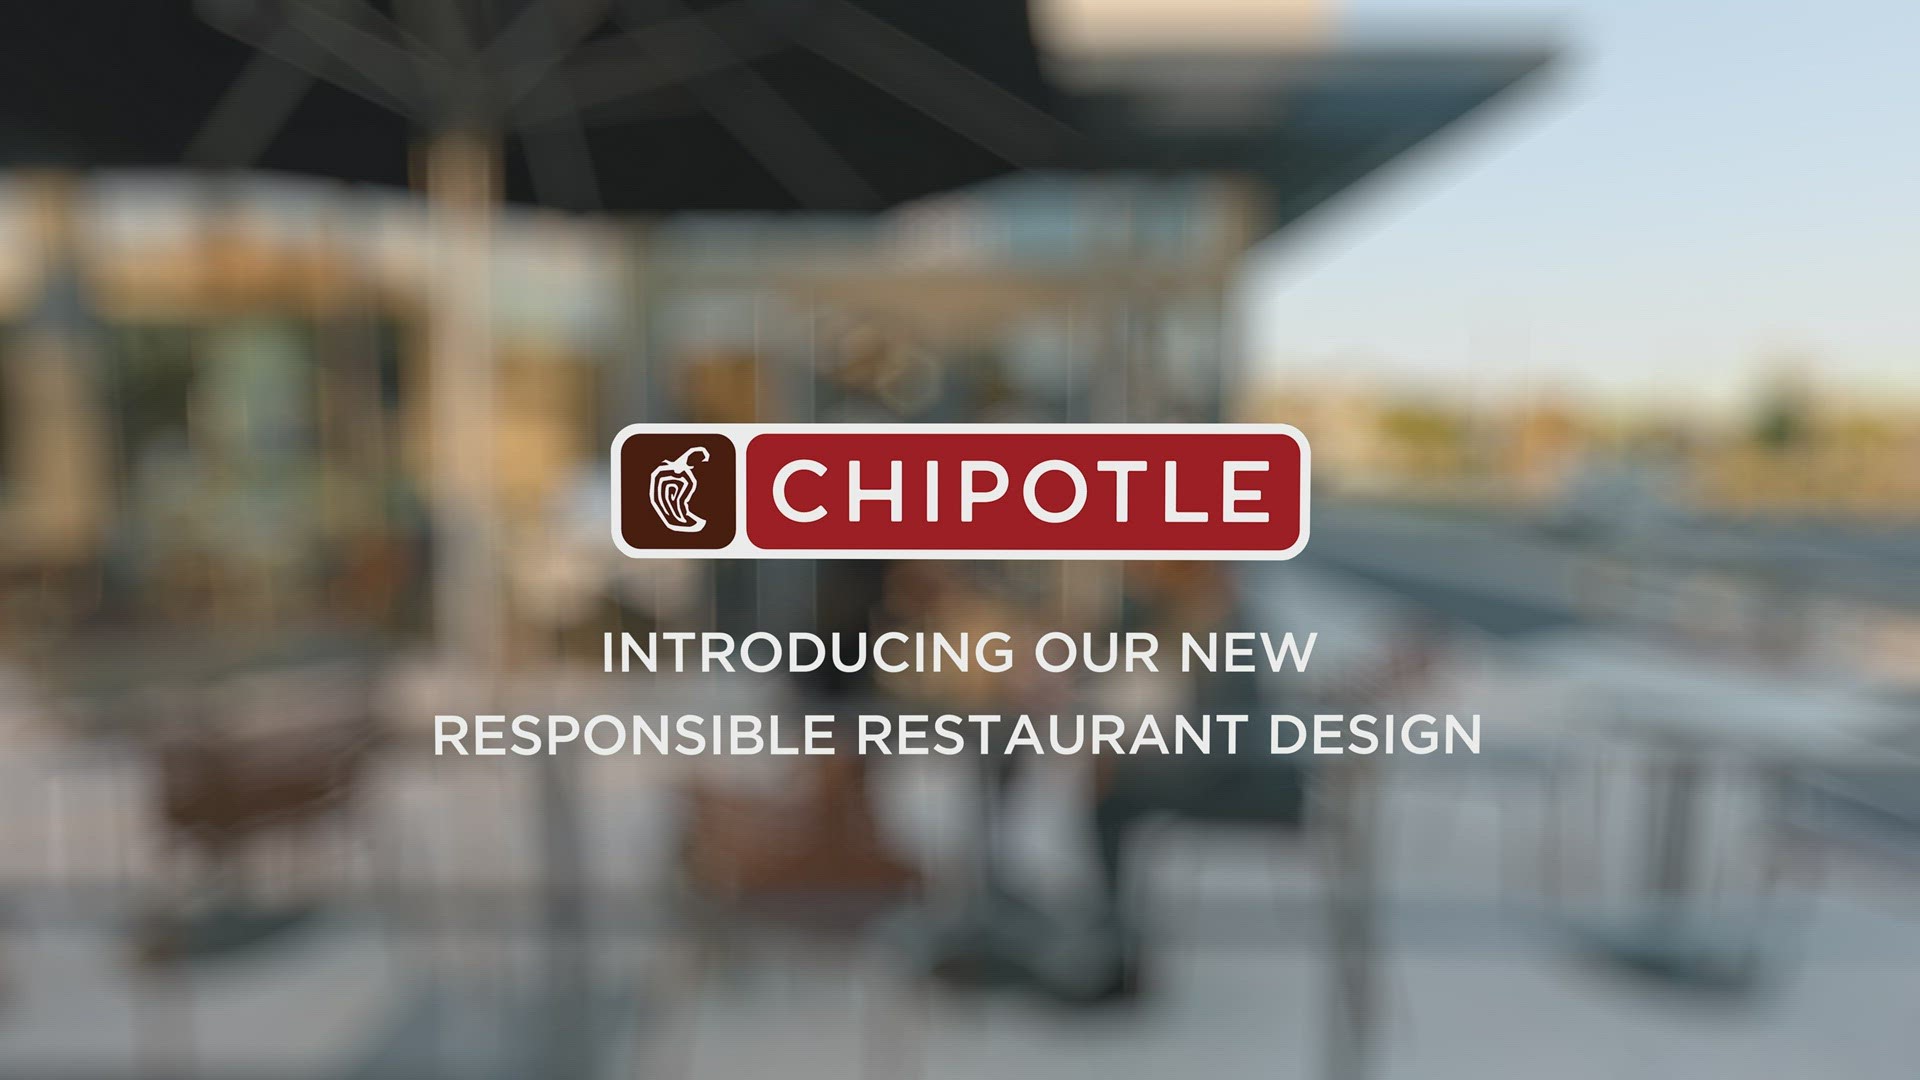 Chipotle announced it will bring its all-electric restaurant design to Colorado.